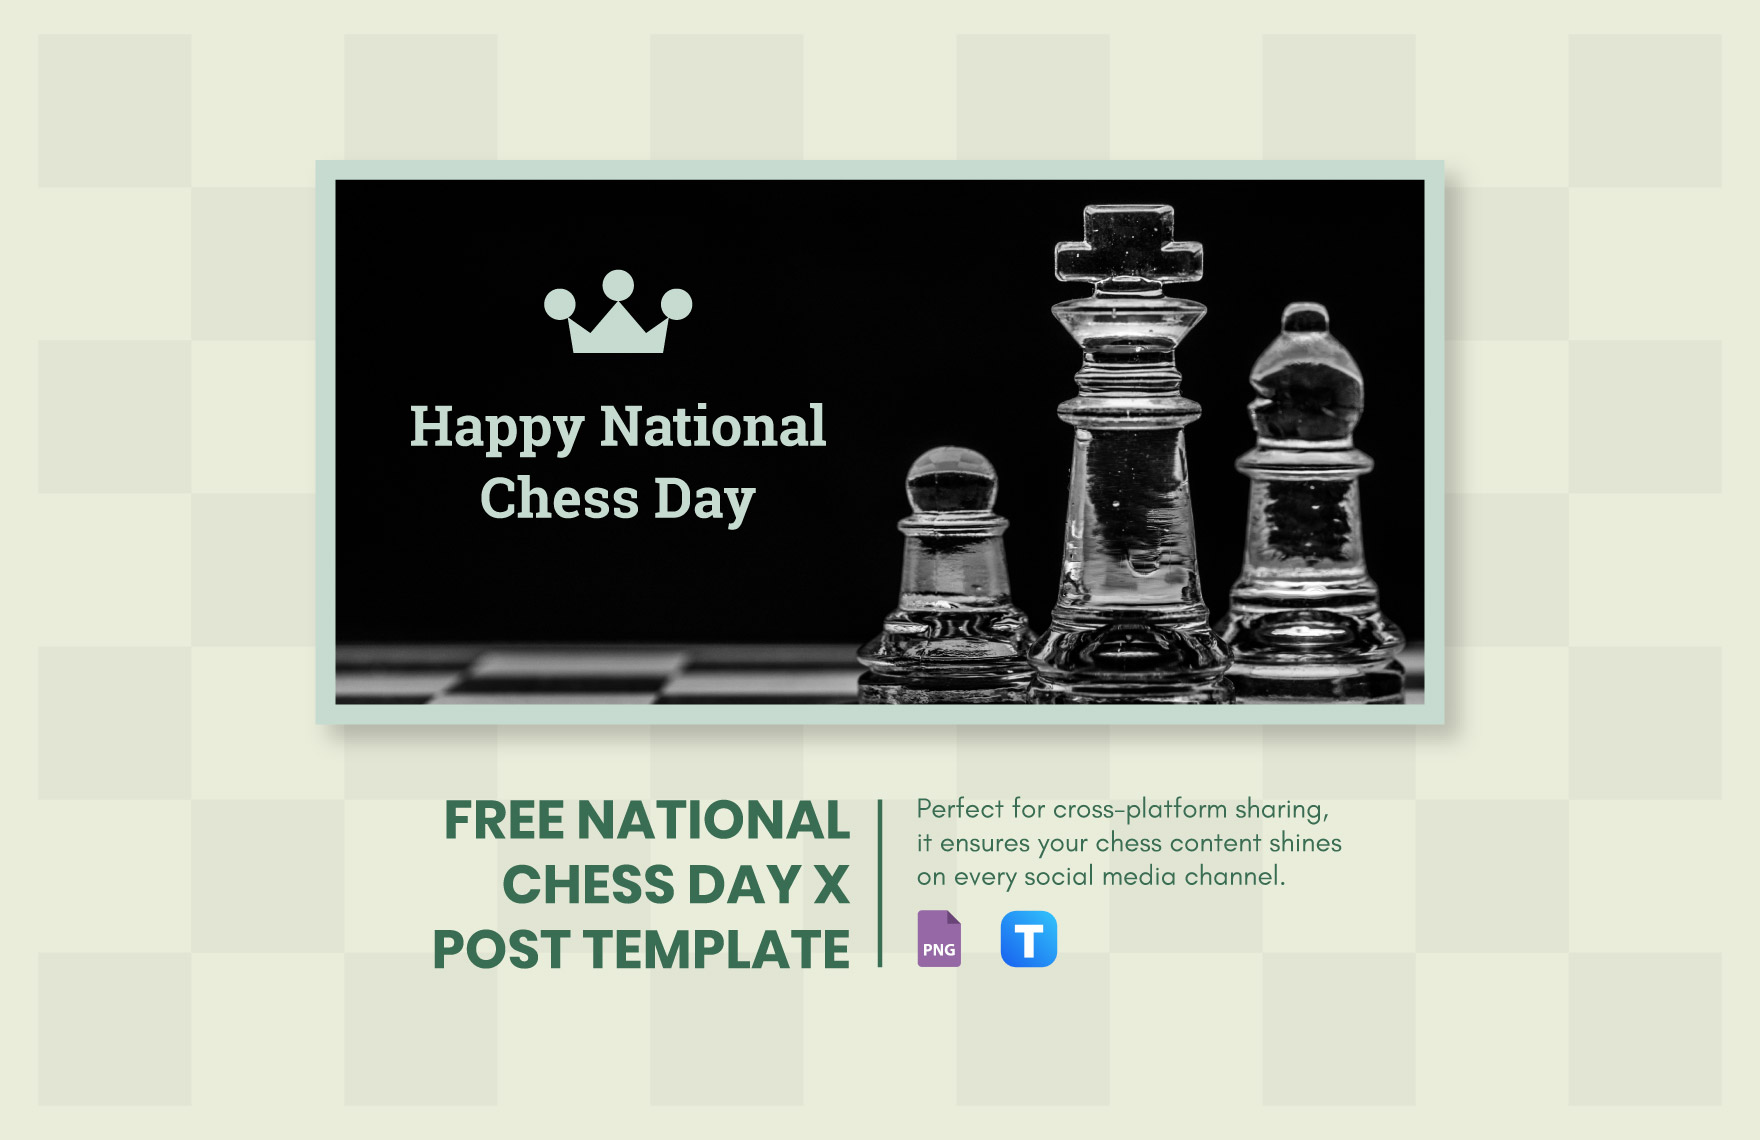 Free National Chess Day X Post Template in PNG